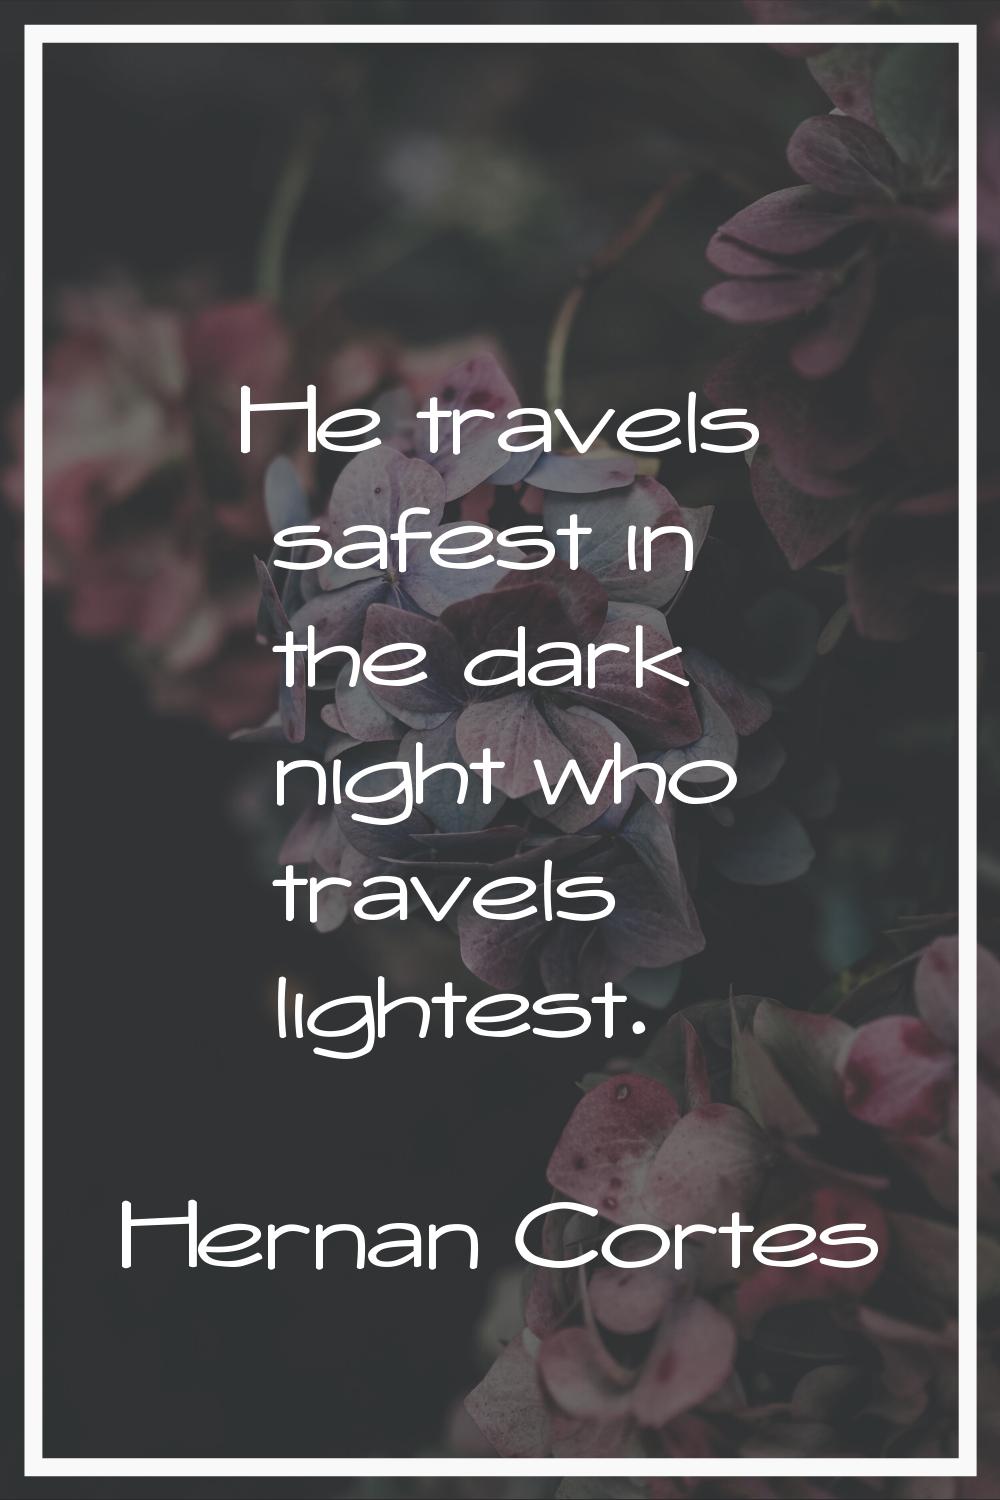 He travels safest in the dark night who travels lightest.